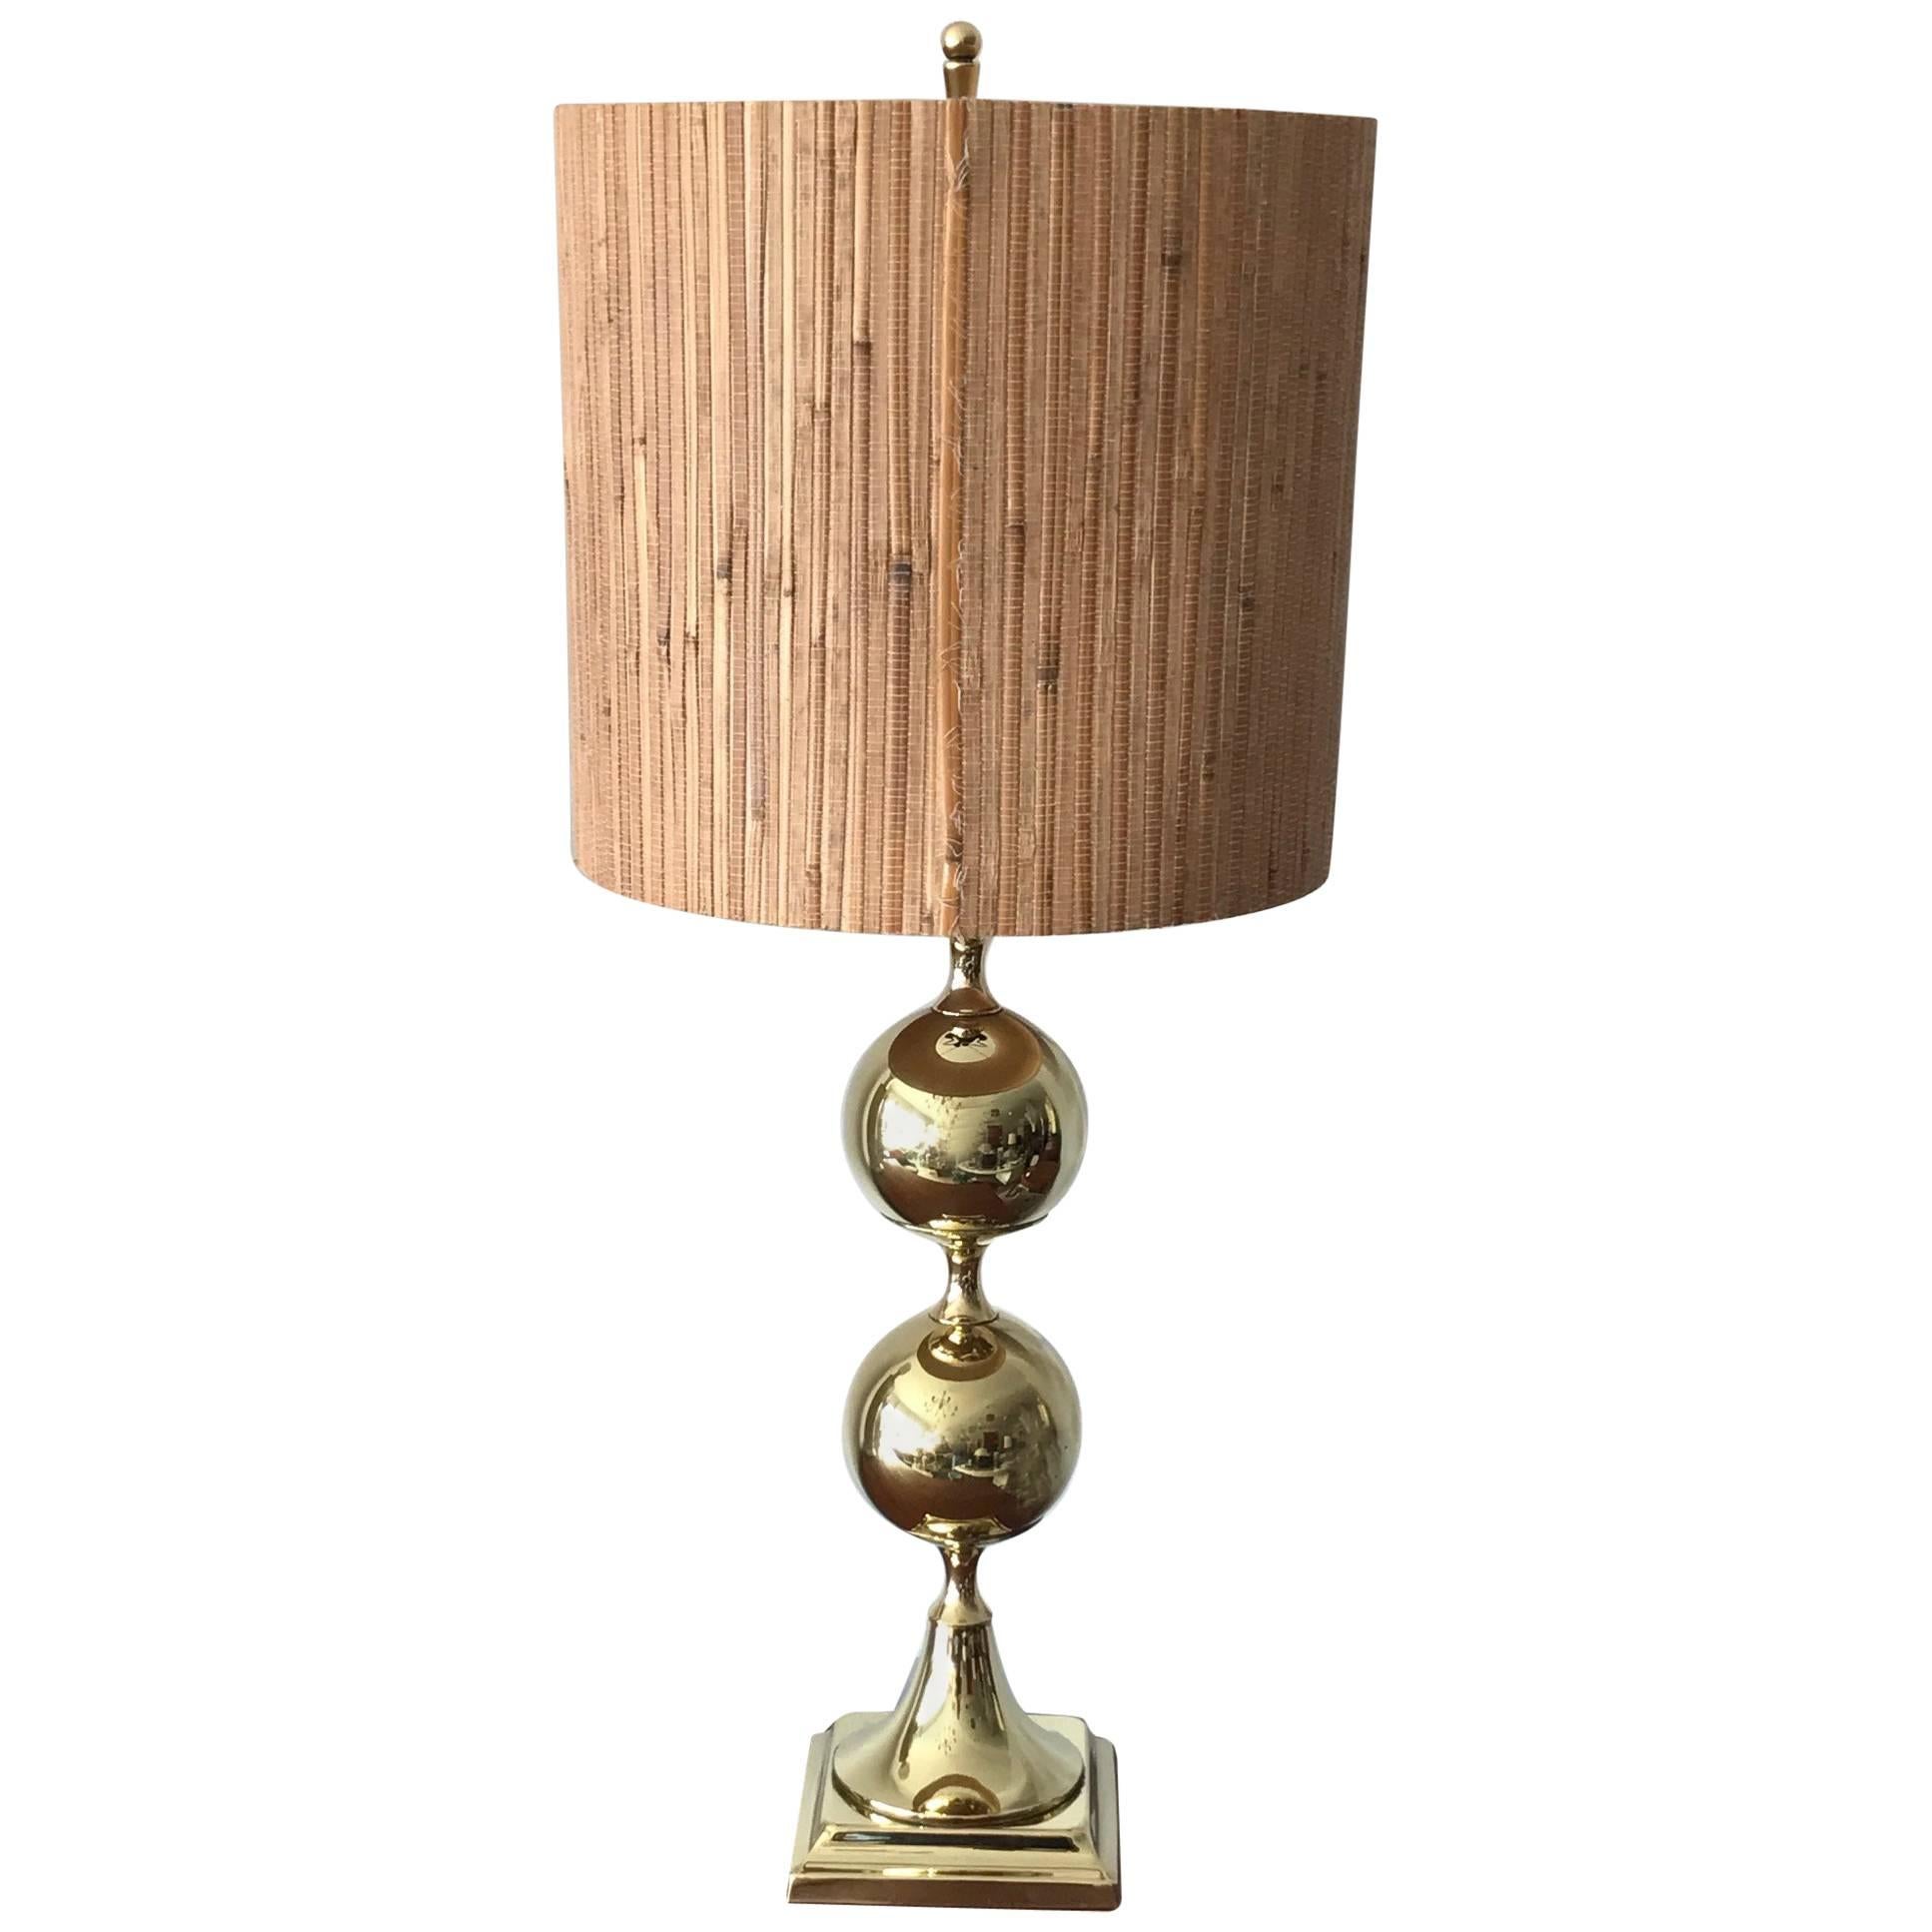 Unusual Polished Brass Lamp by Tower Craftsman